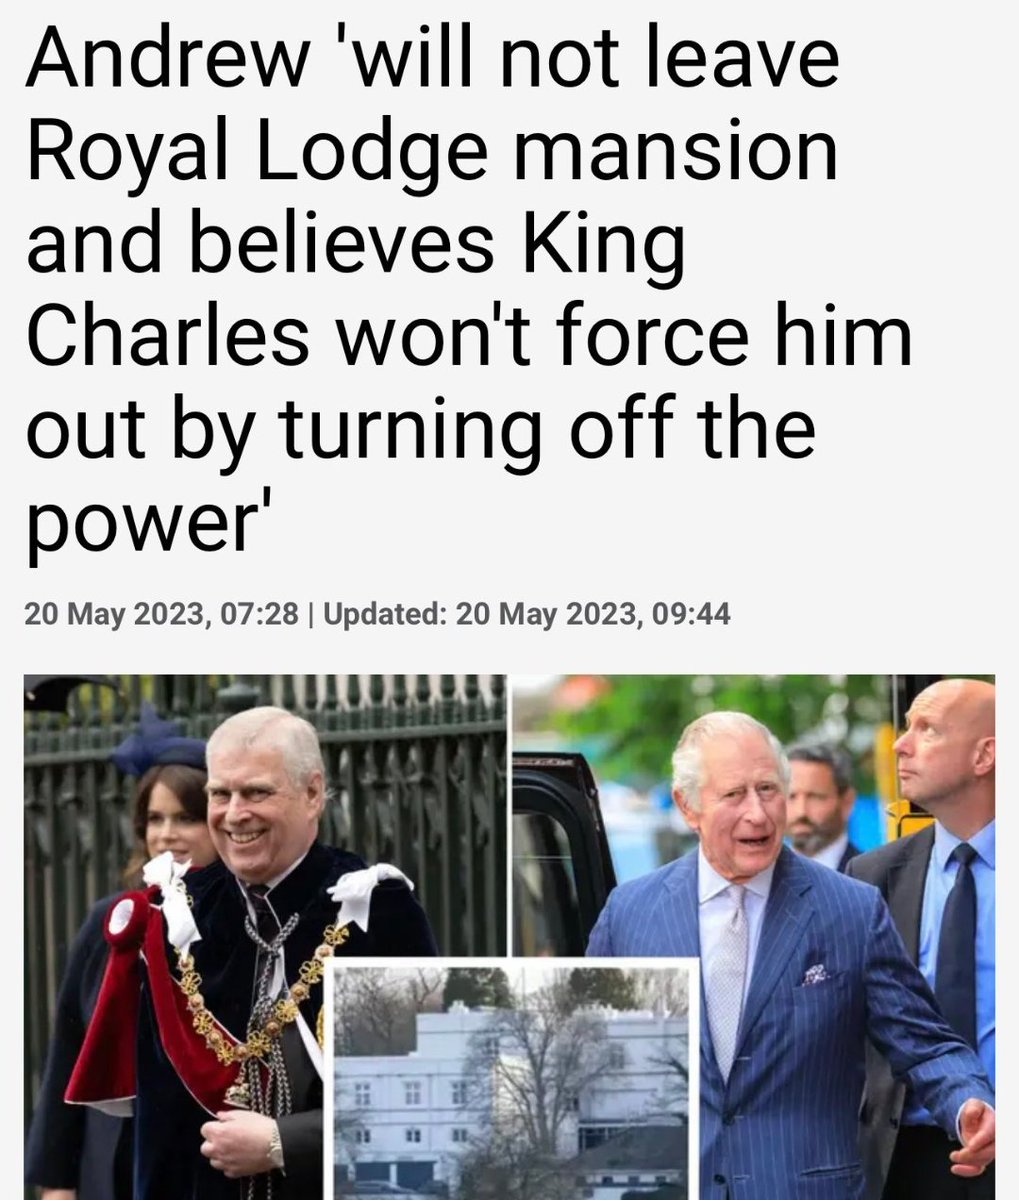 @David_Challen @claireXanda PRINCE ANDREW AIN'T GOING ANYWHERE....BECAUSE HE HAS TOO MUCH DIRT ON KING CHARLES III💯